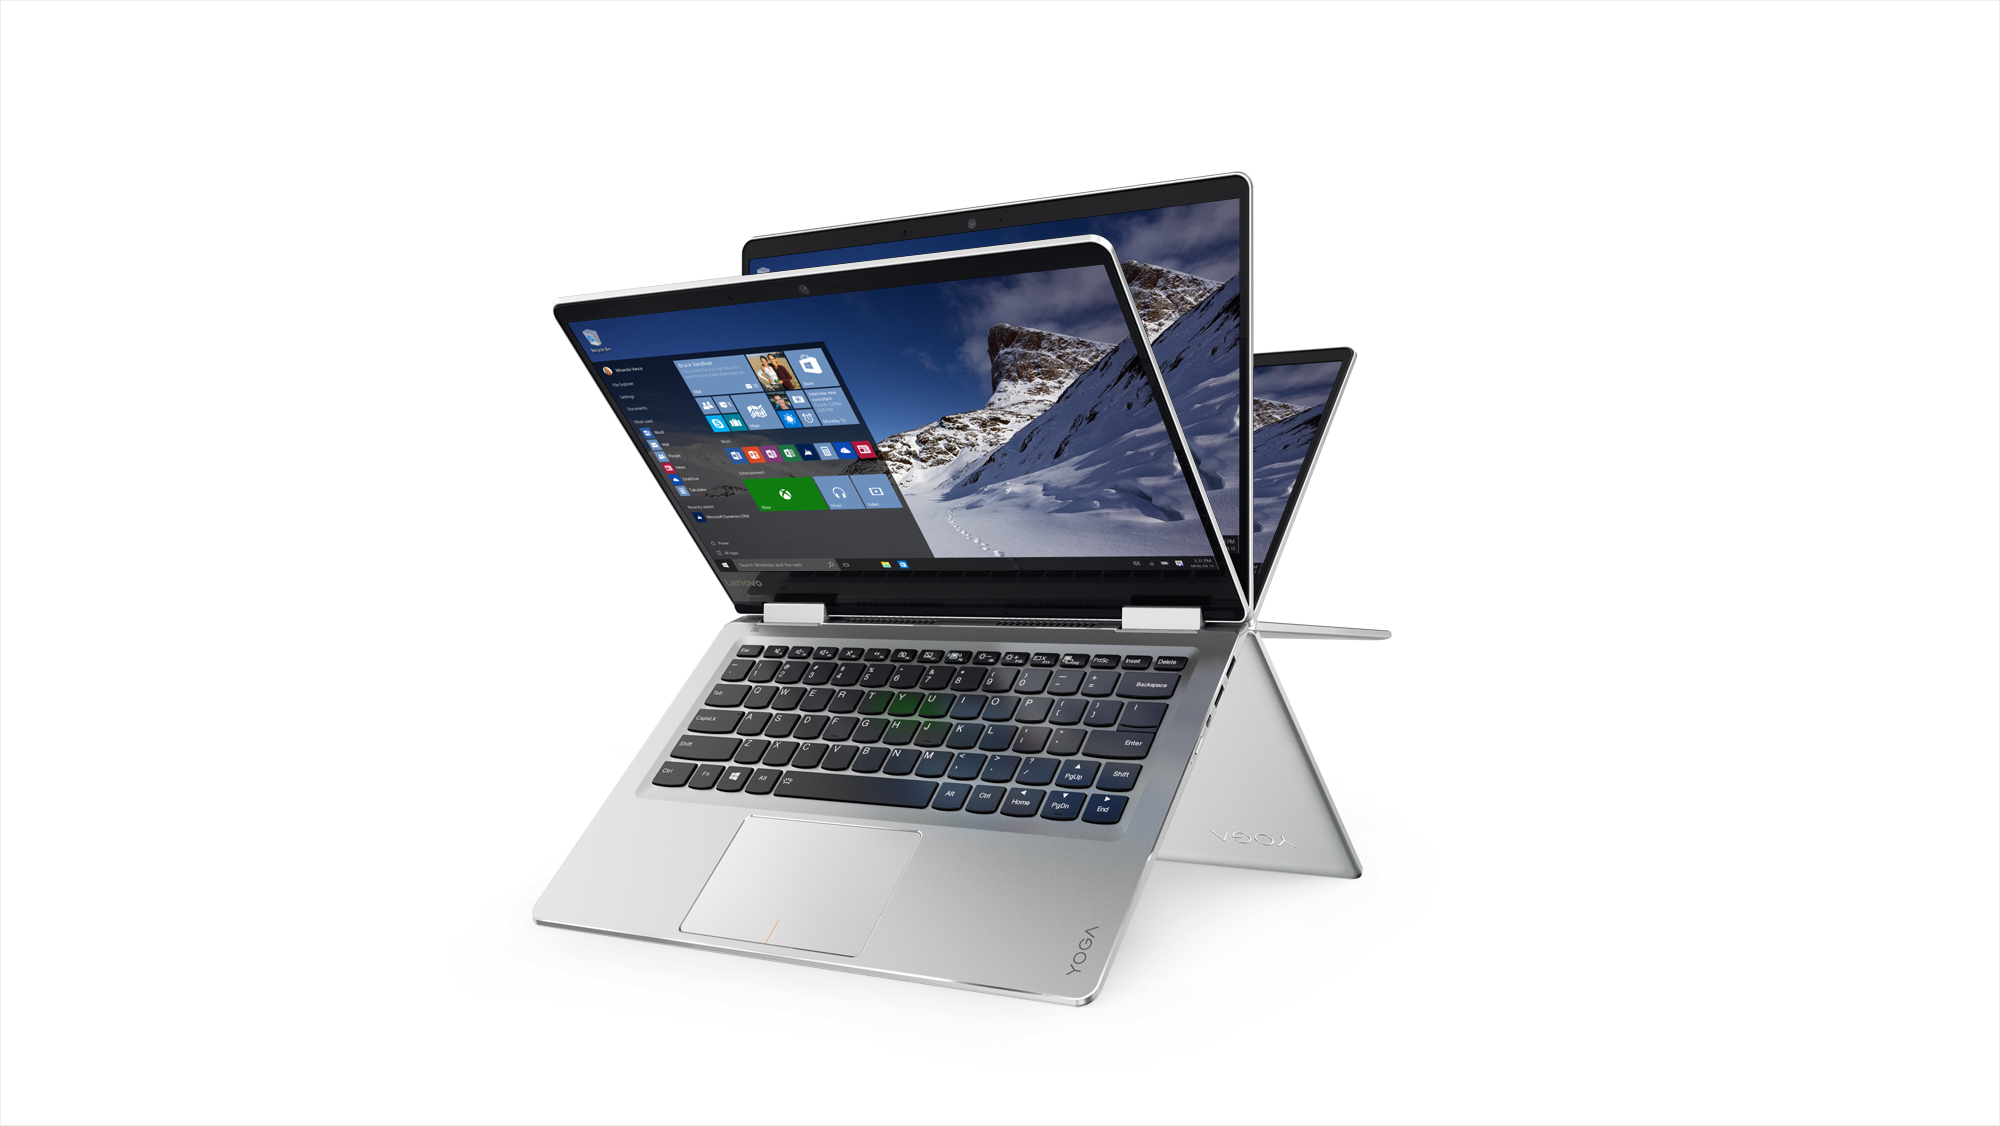 The Lenovo YOGA 710 is a powerful convertible laptop, powered by Windows 10.